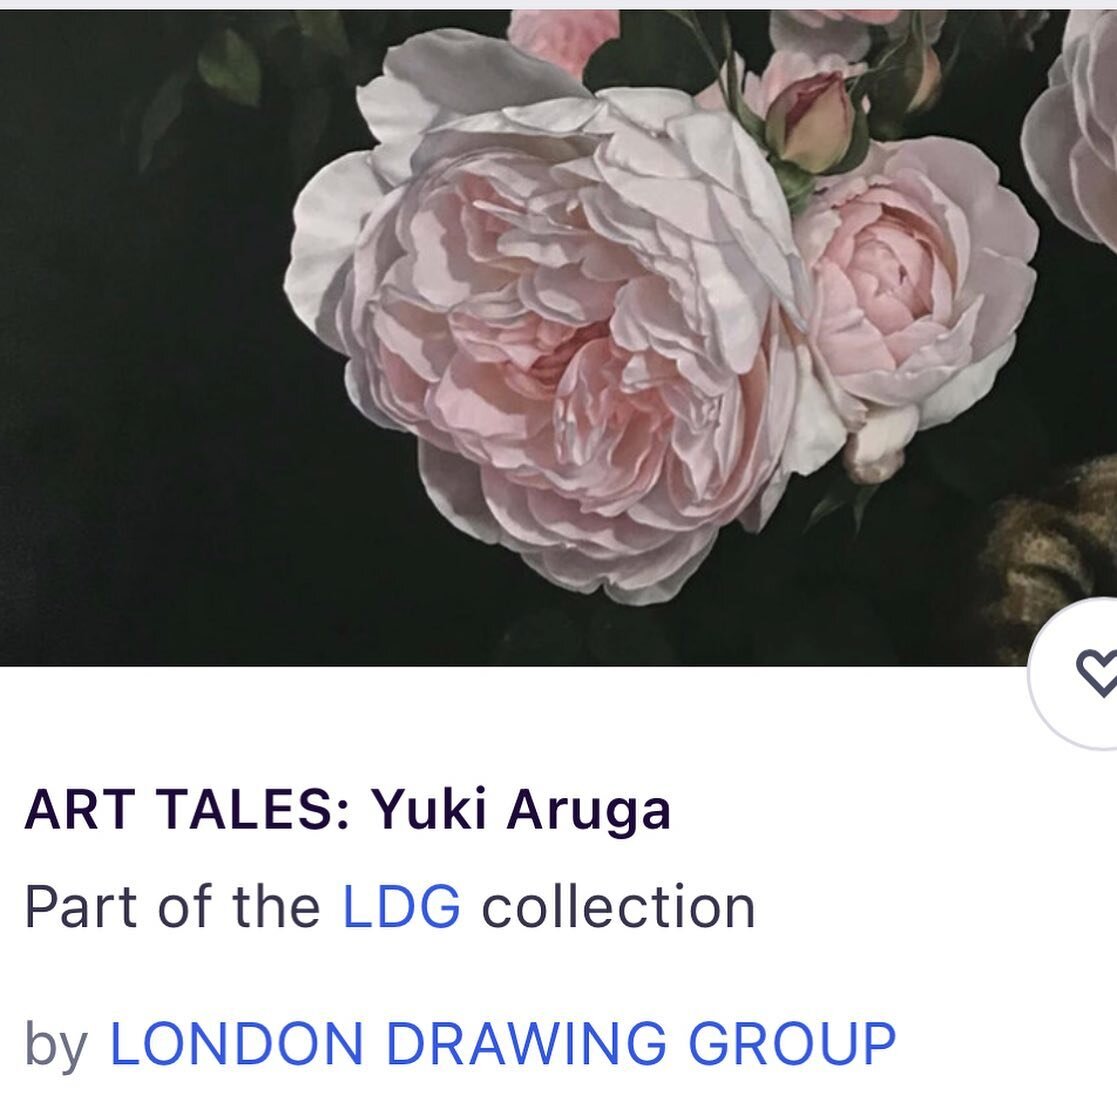 TONIGHT! @yuki.aruga joins @luisamariamfineart in discussion for our ART TALES series, giving you a glimpse of her incredible still life painting practice, discussing its evolution and the concepts behind it! Check out our stories for more info and t